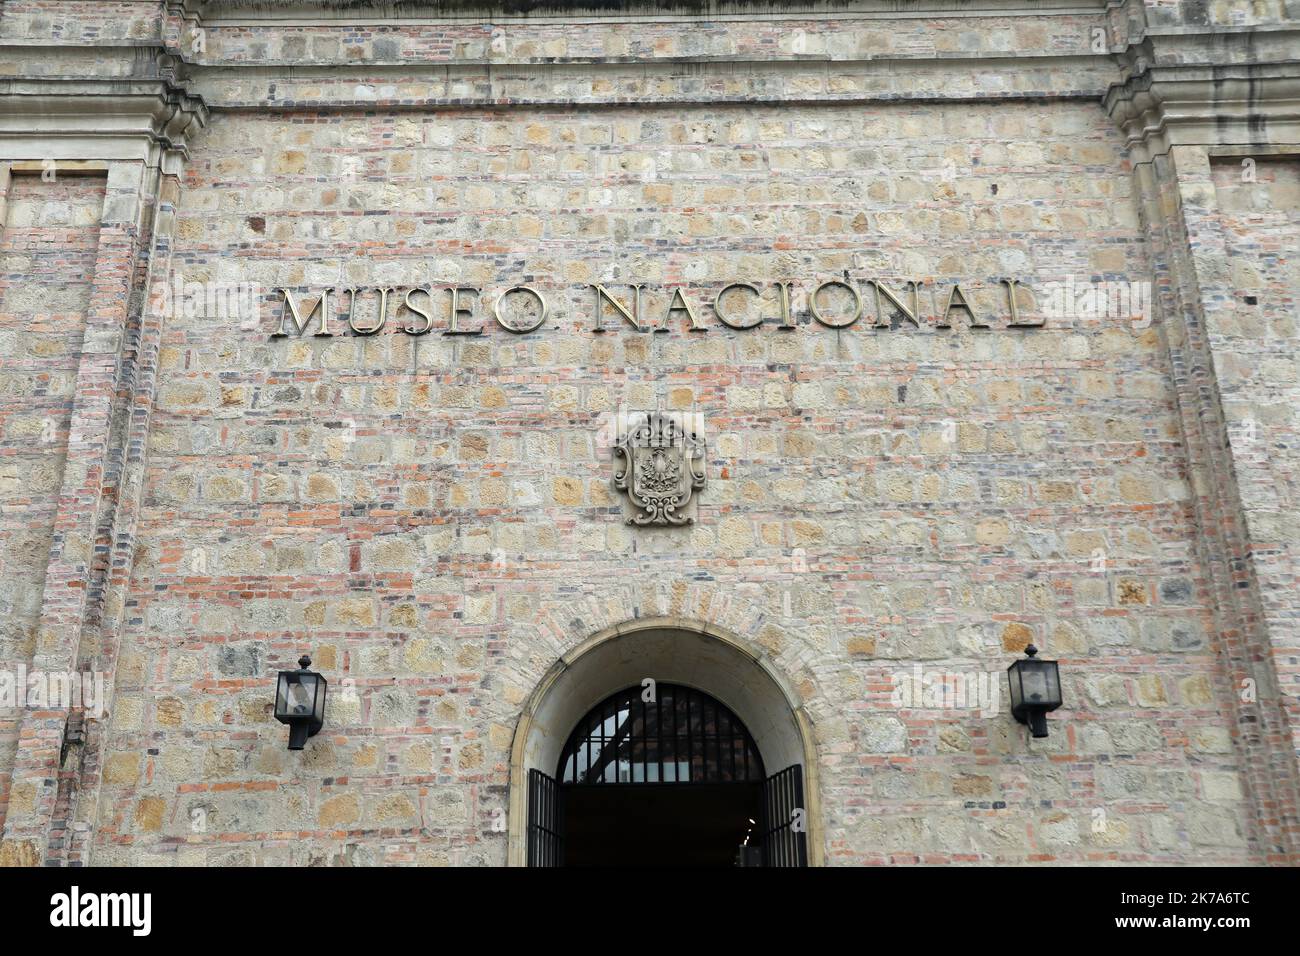 National Museum of Colombia in Bogota which was built in 1823 Stock Photo